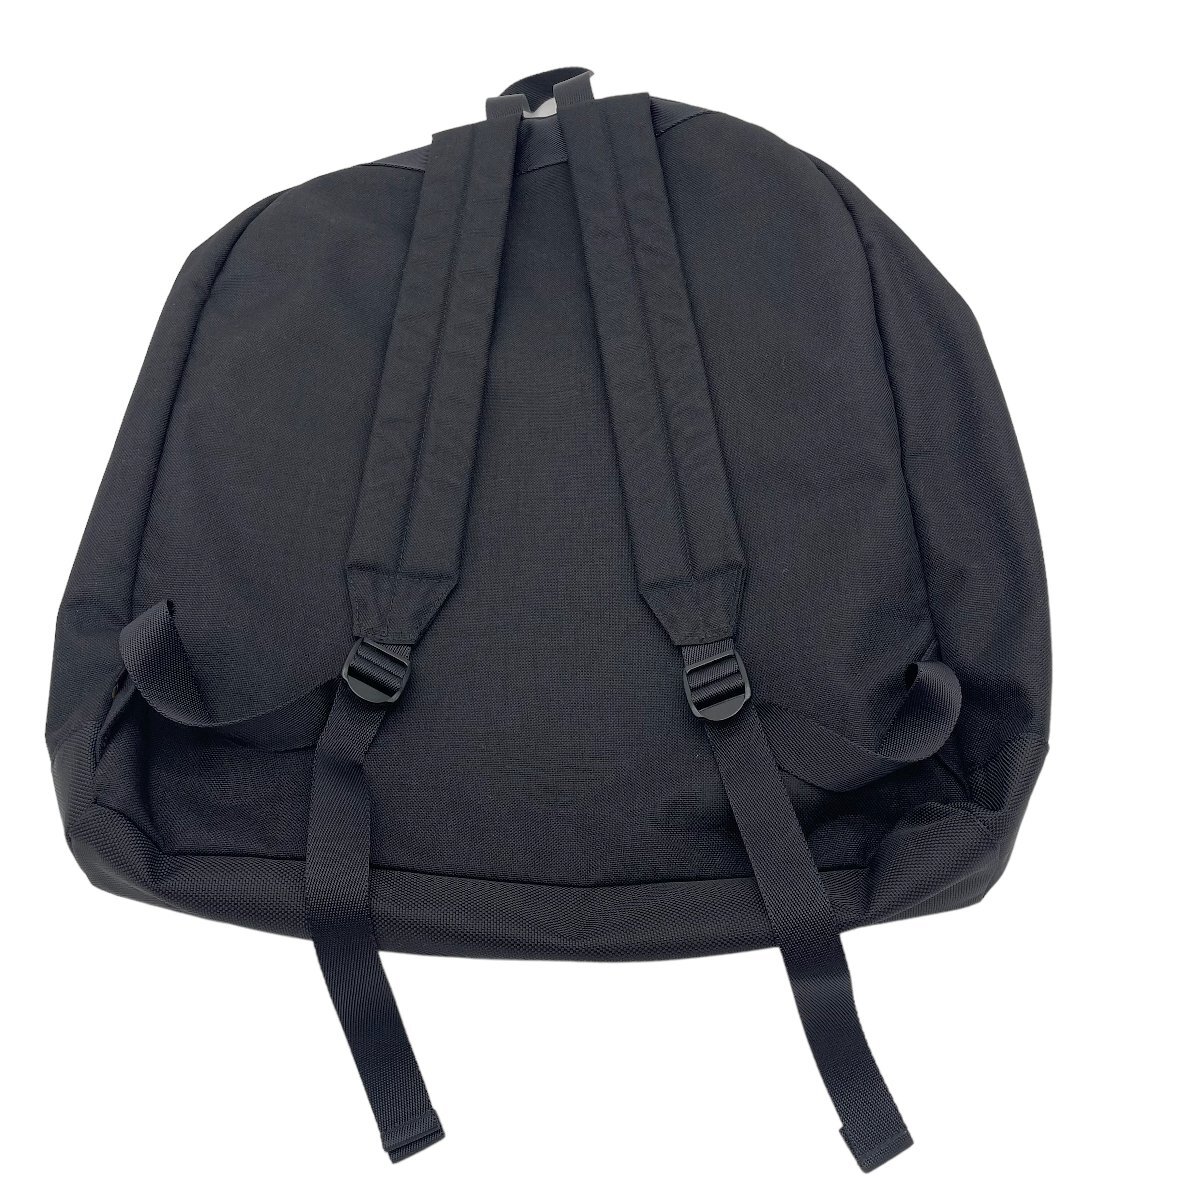 A807●美品●UNION ×OUTDOOR PRODUCTS ユニオン×アウトドアプロダクツ●Large PALS Backpack リュック バックパック●ブラックの画像3